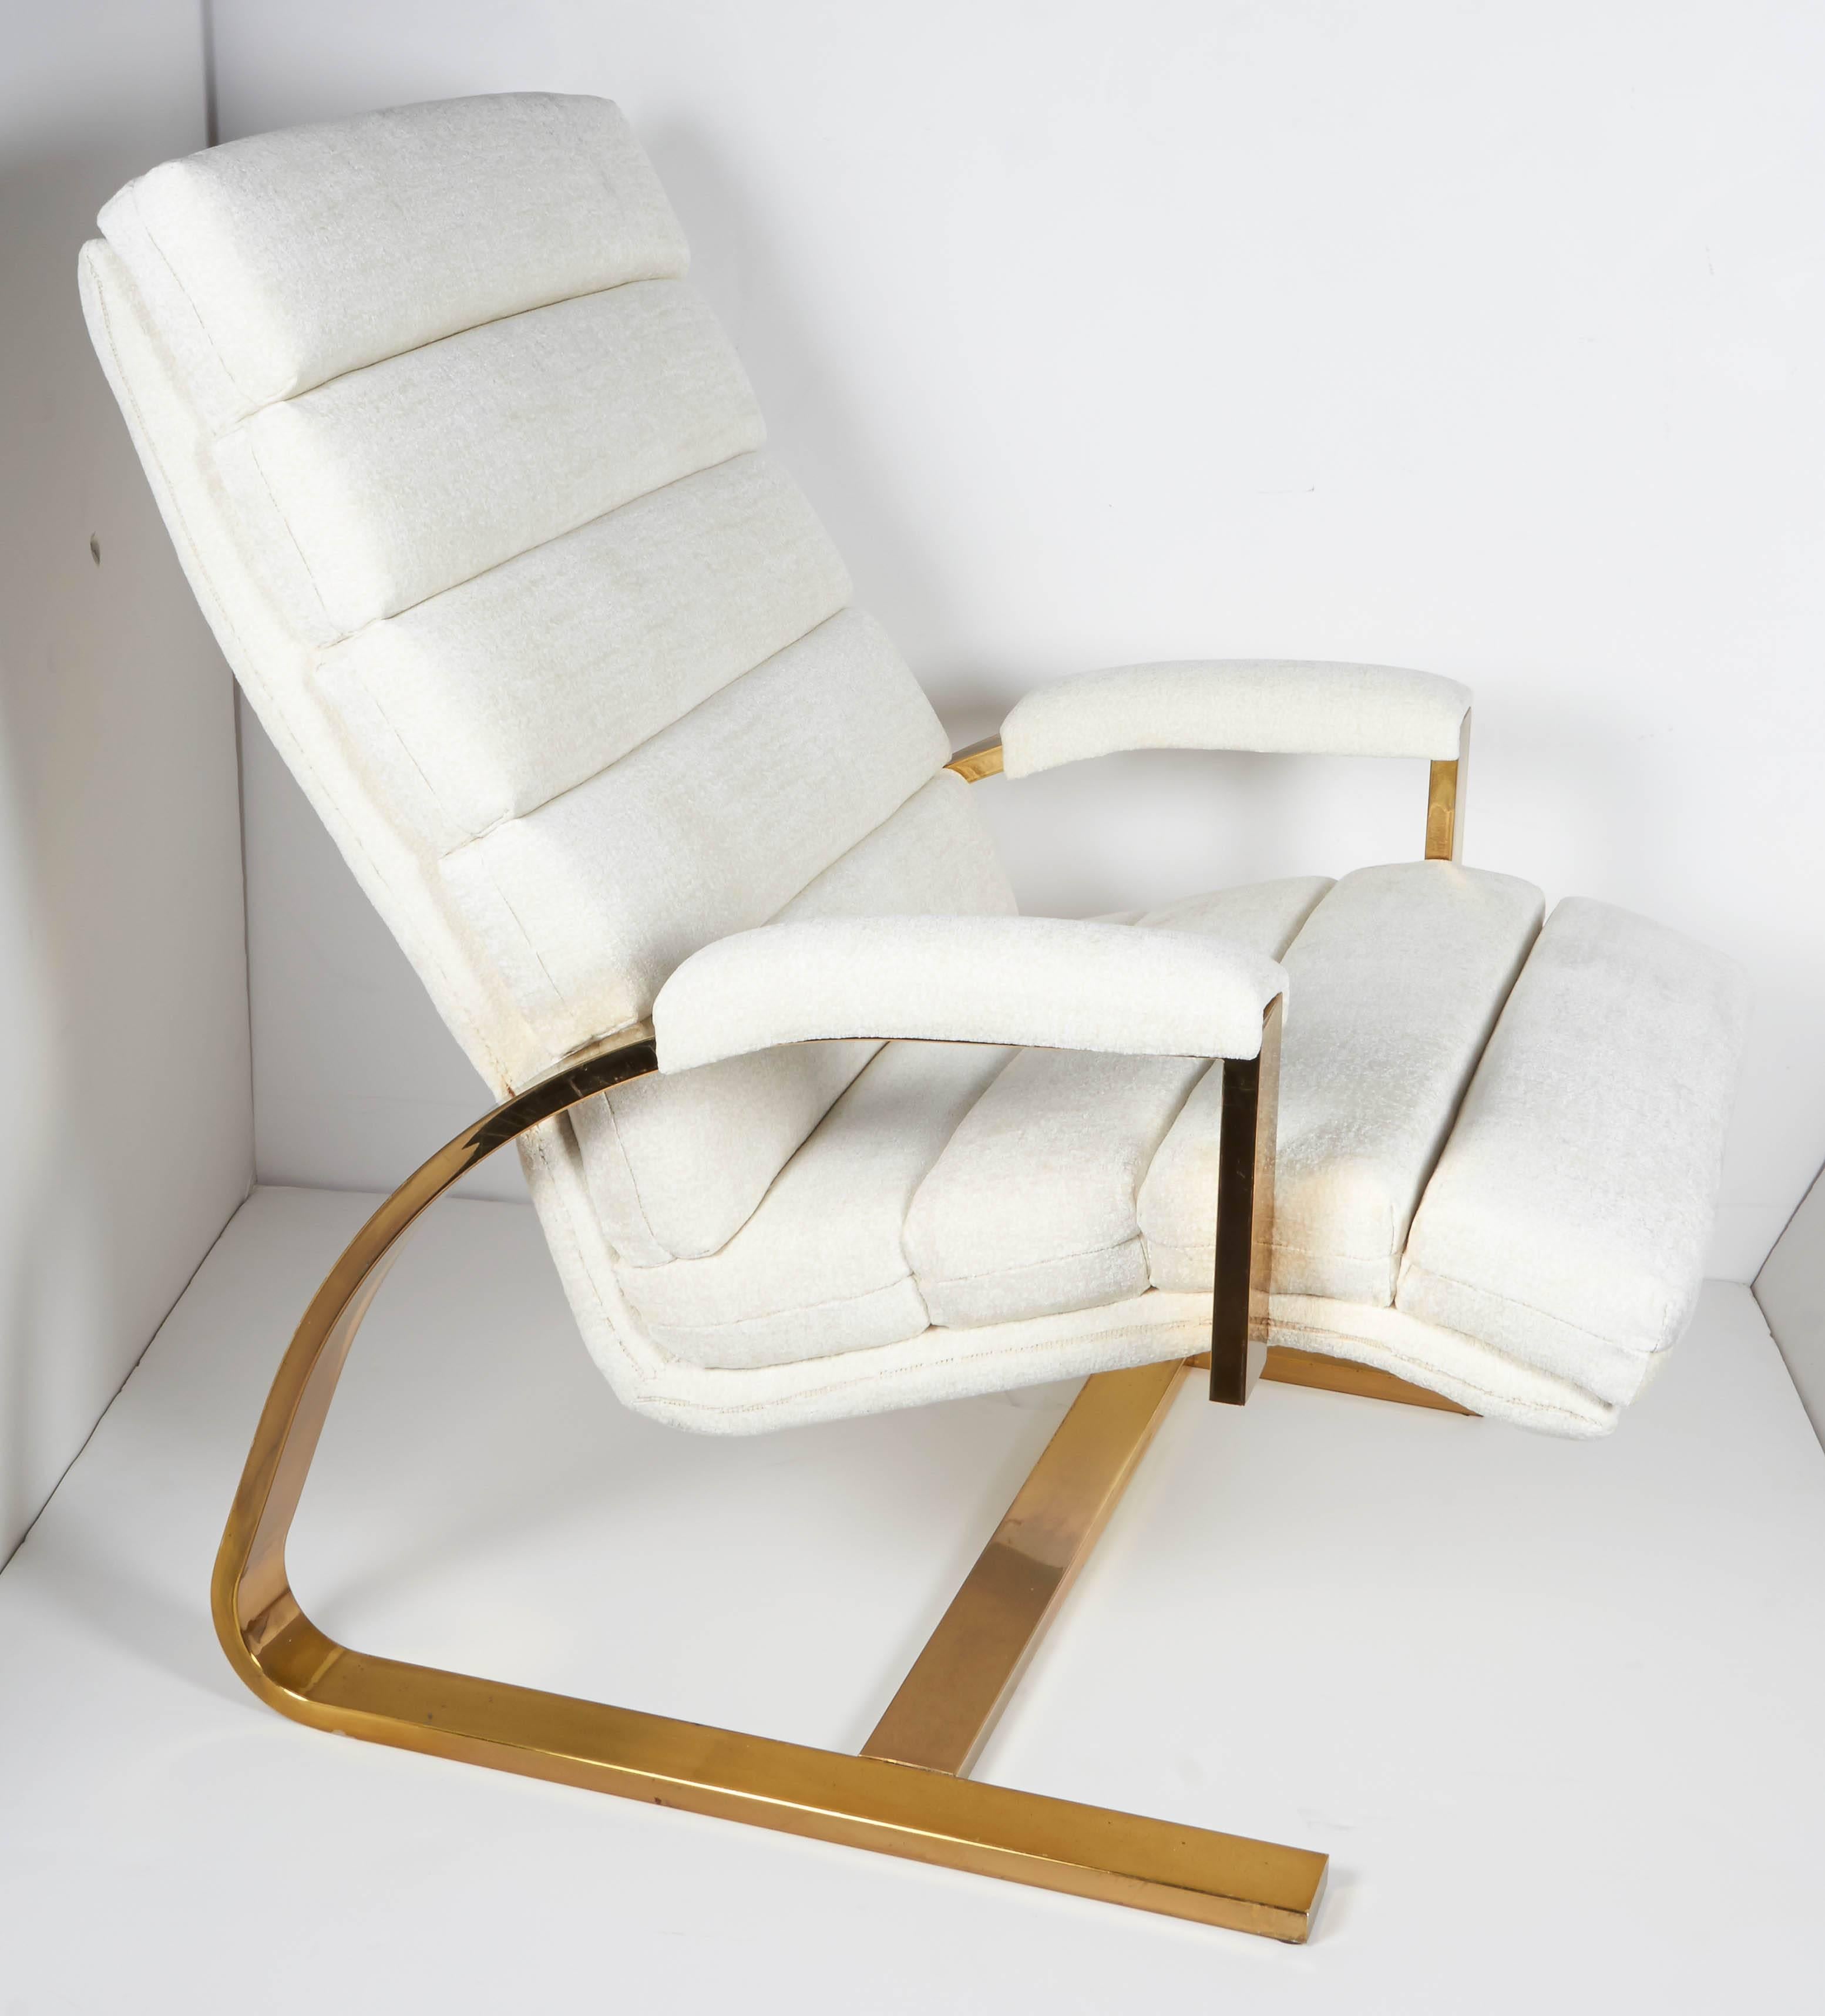 American Pair of Rare Milo Baughman Lounge Chairs with Brass Cantilevered Frames